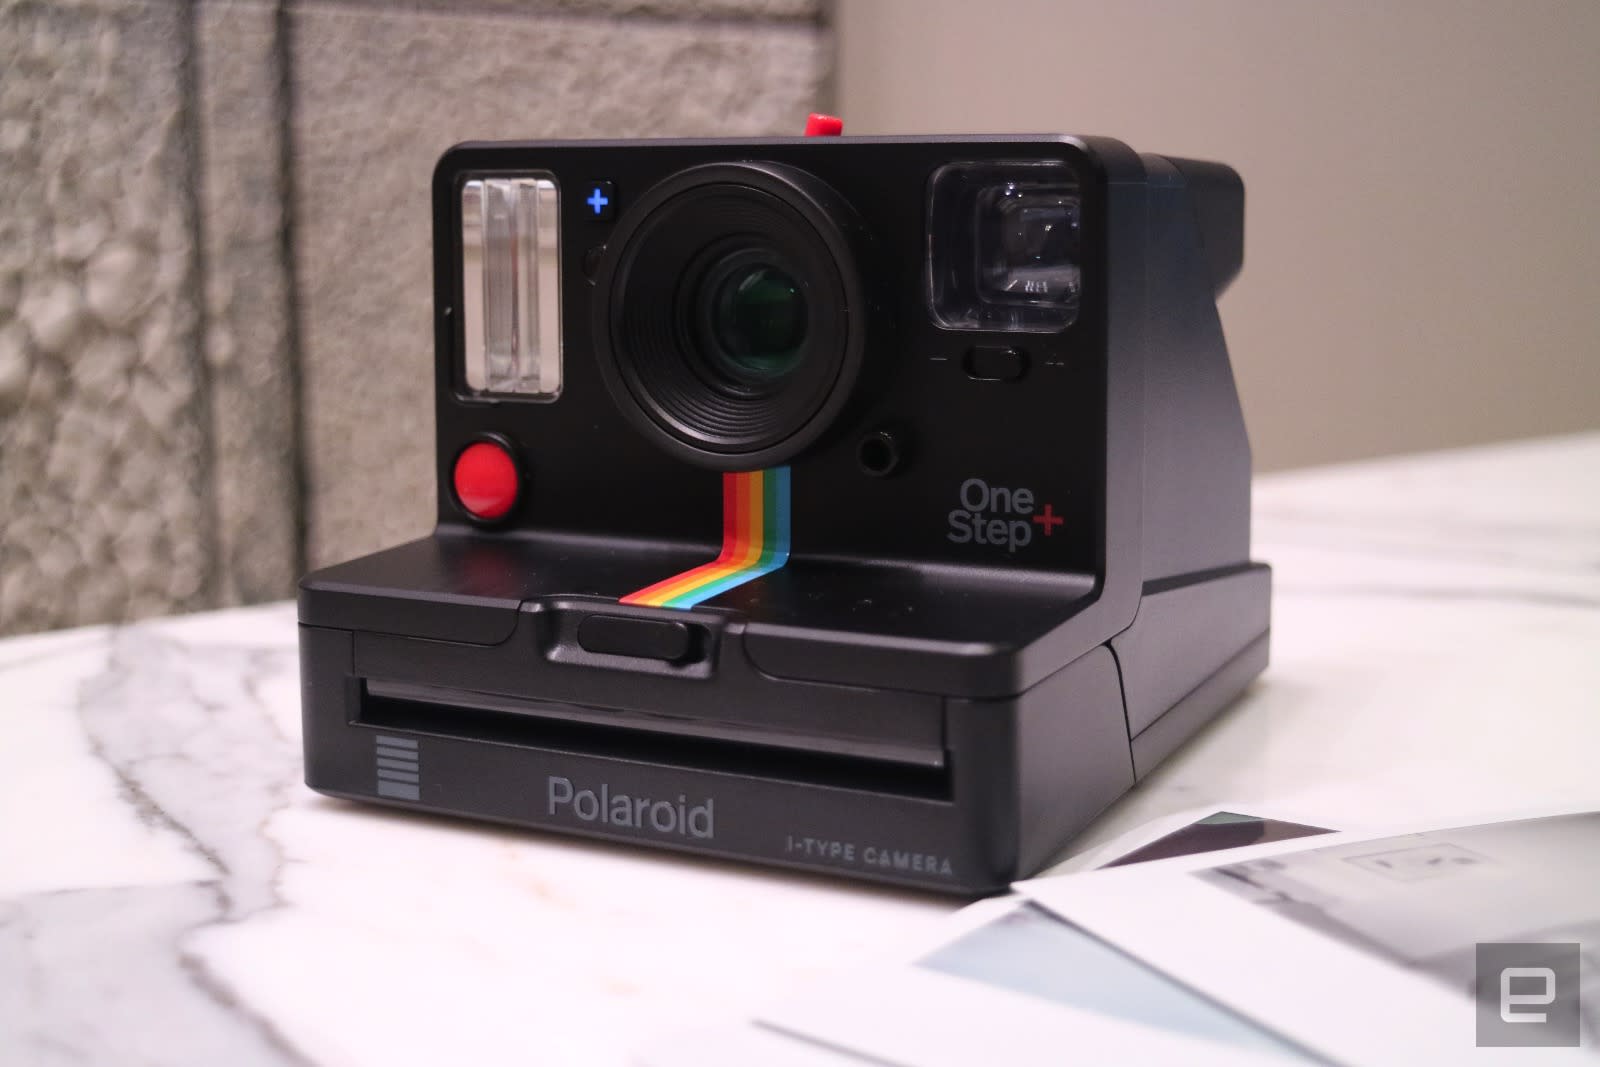 Polaroid S Onestep Instant Camera Makes Remote Selfies Possible Engadget